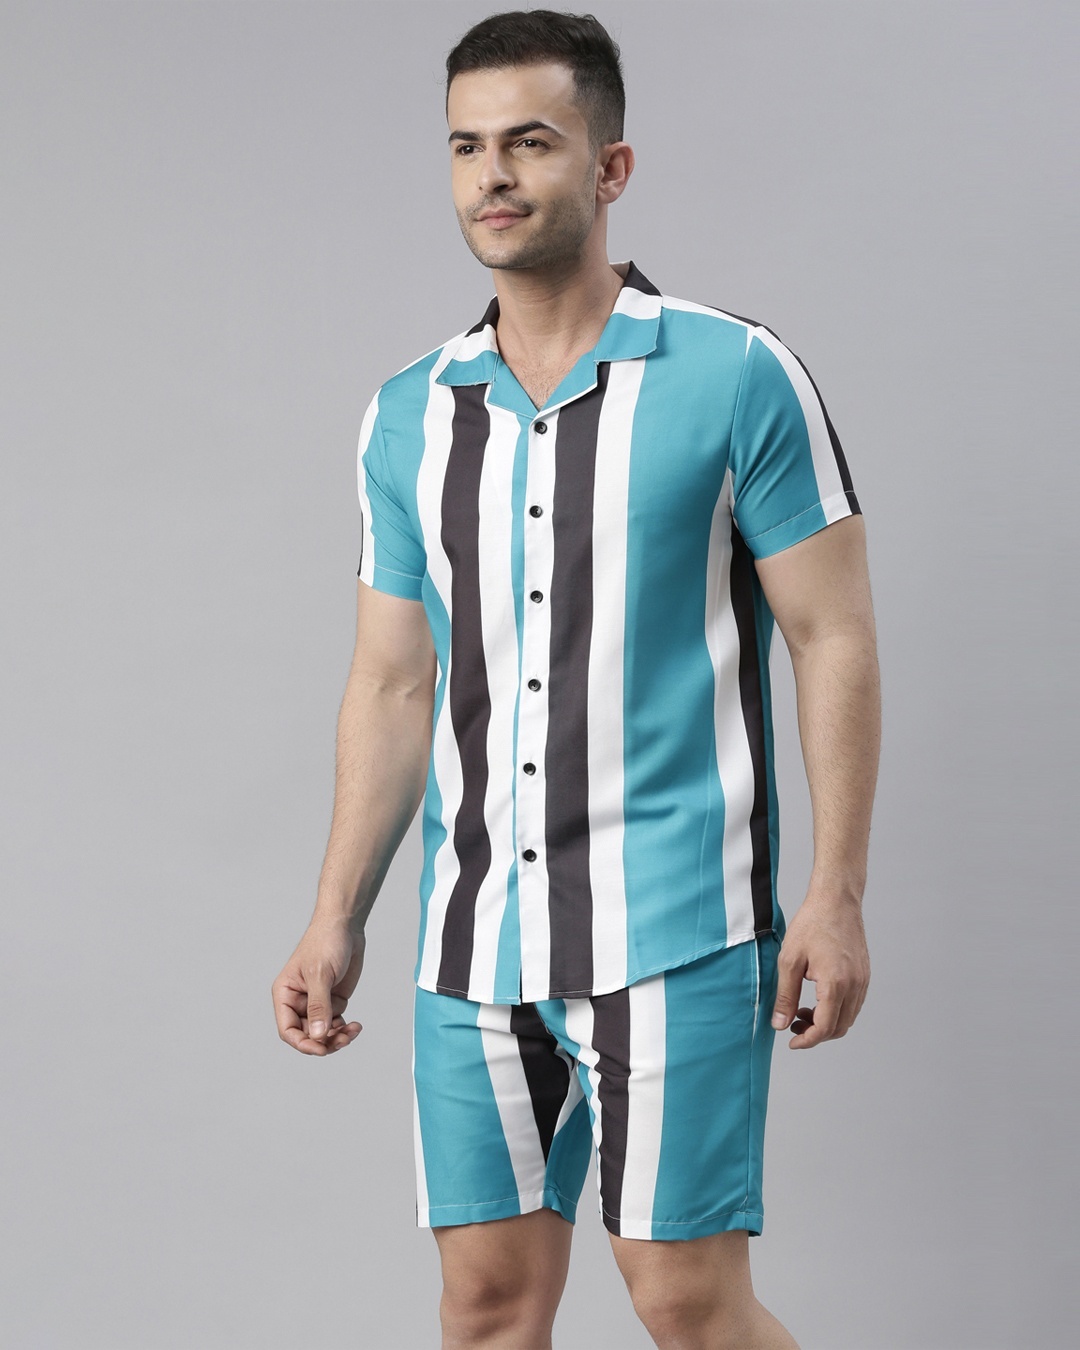 Buy Men's Blue & White Striped Co-ord Set Online in India at Bewakoof